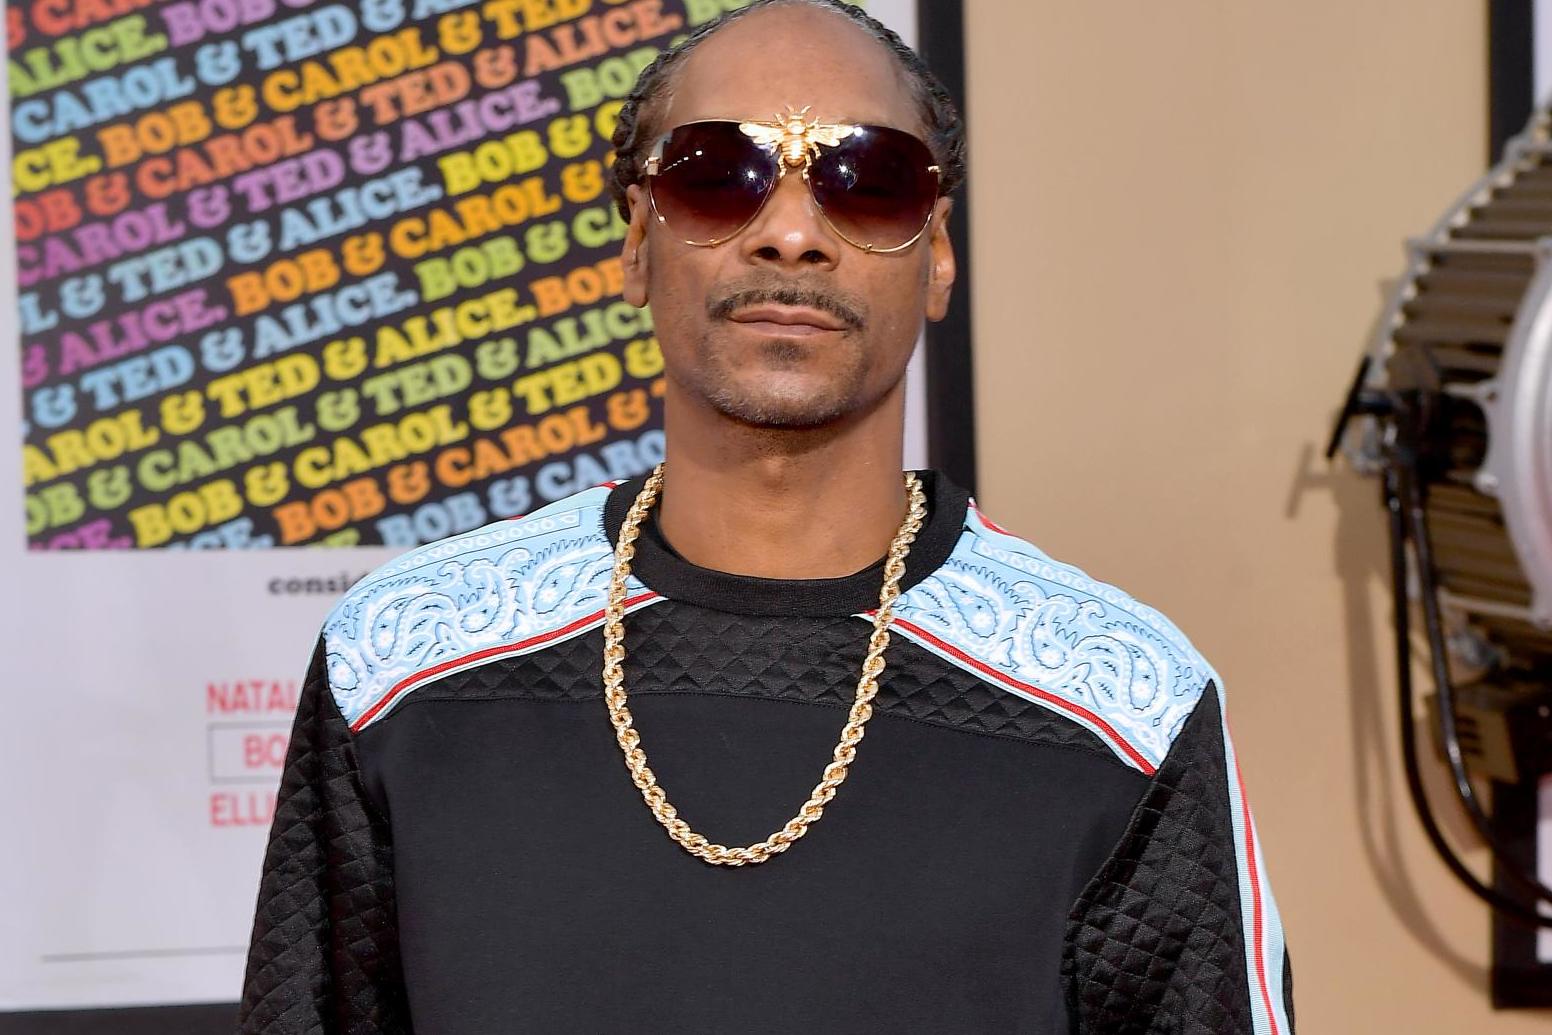 Snoop Dogg will perform at the Super Bowl halftime show